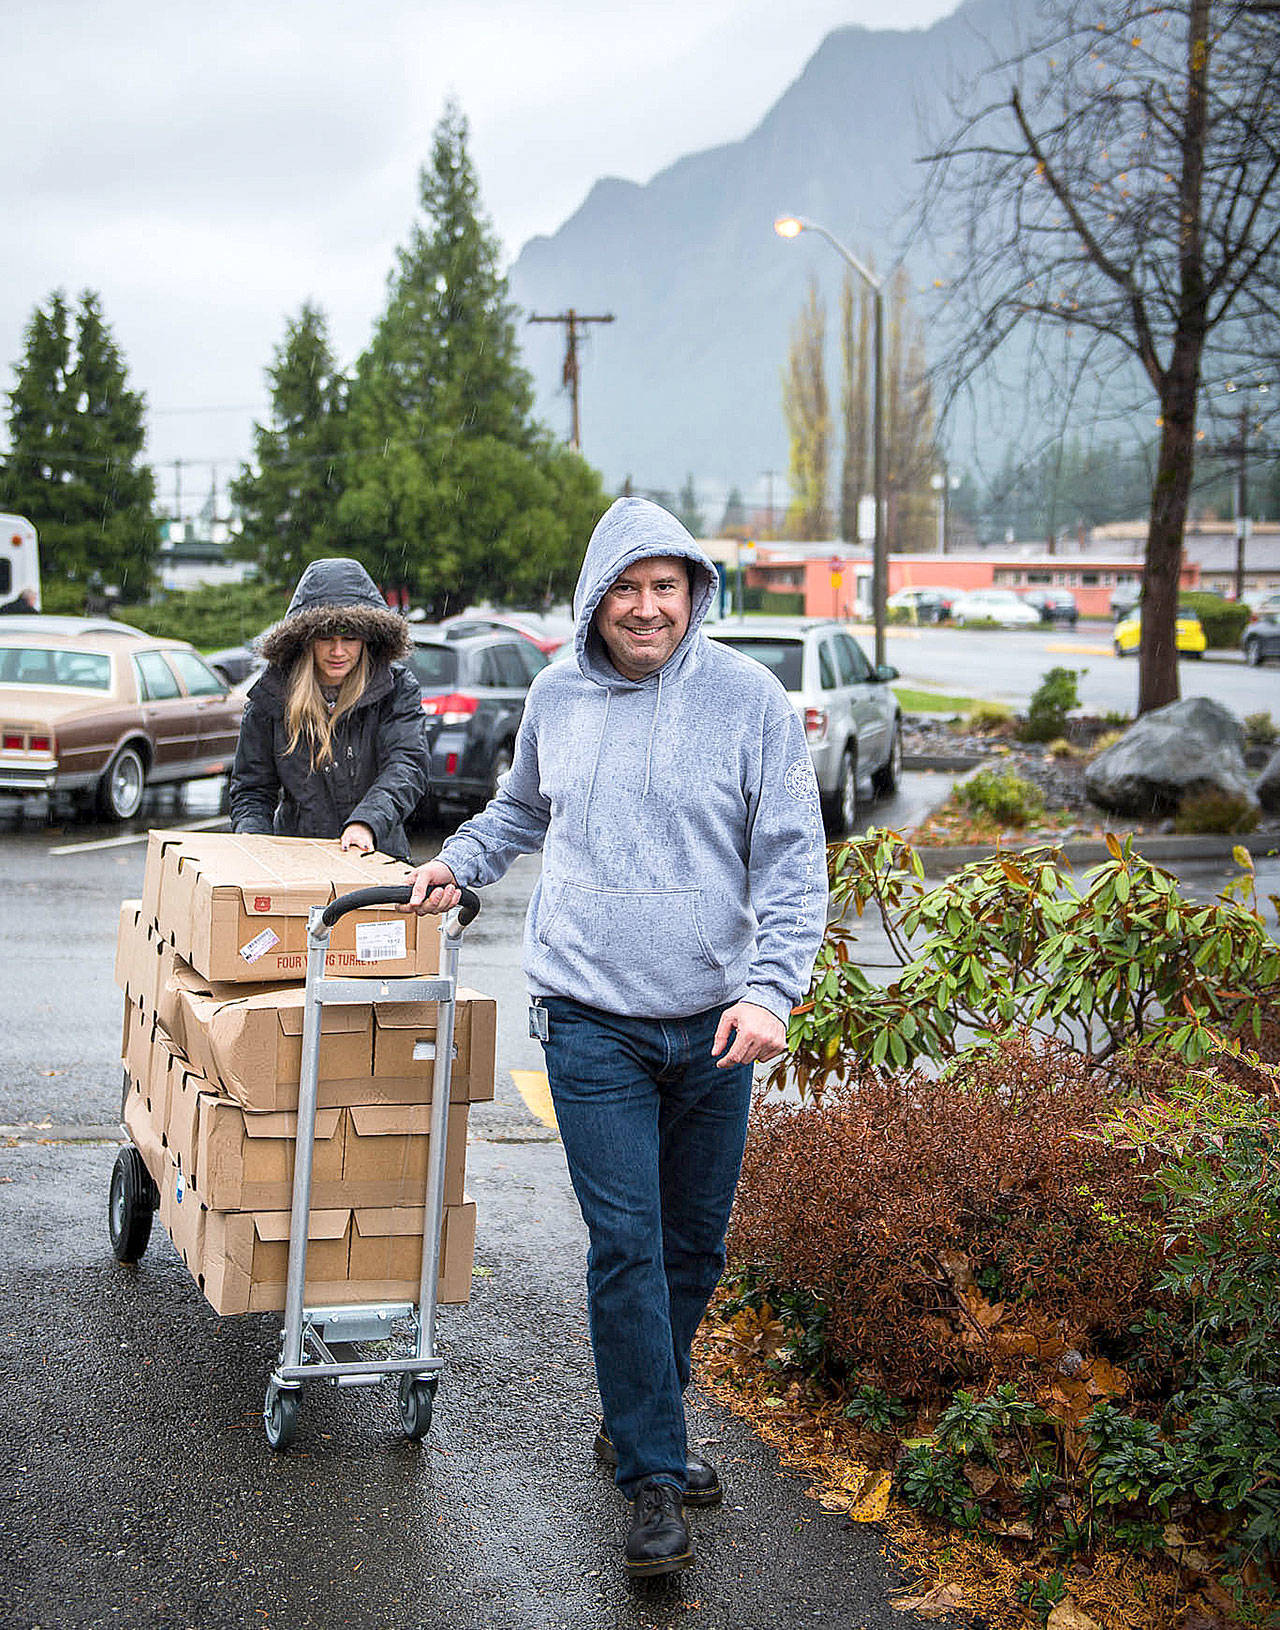 Snoqualmie Tribe volunteers collect turkeys for distribution to families and seniors in need this week in the Valley. (Photo courtesy of the Snoqualmie Tribe)